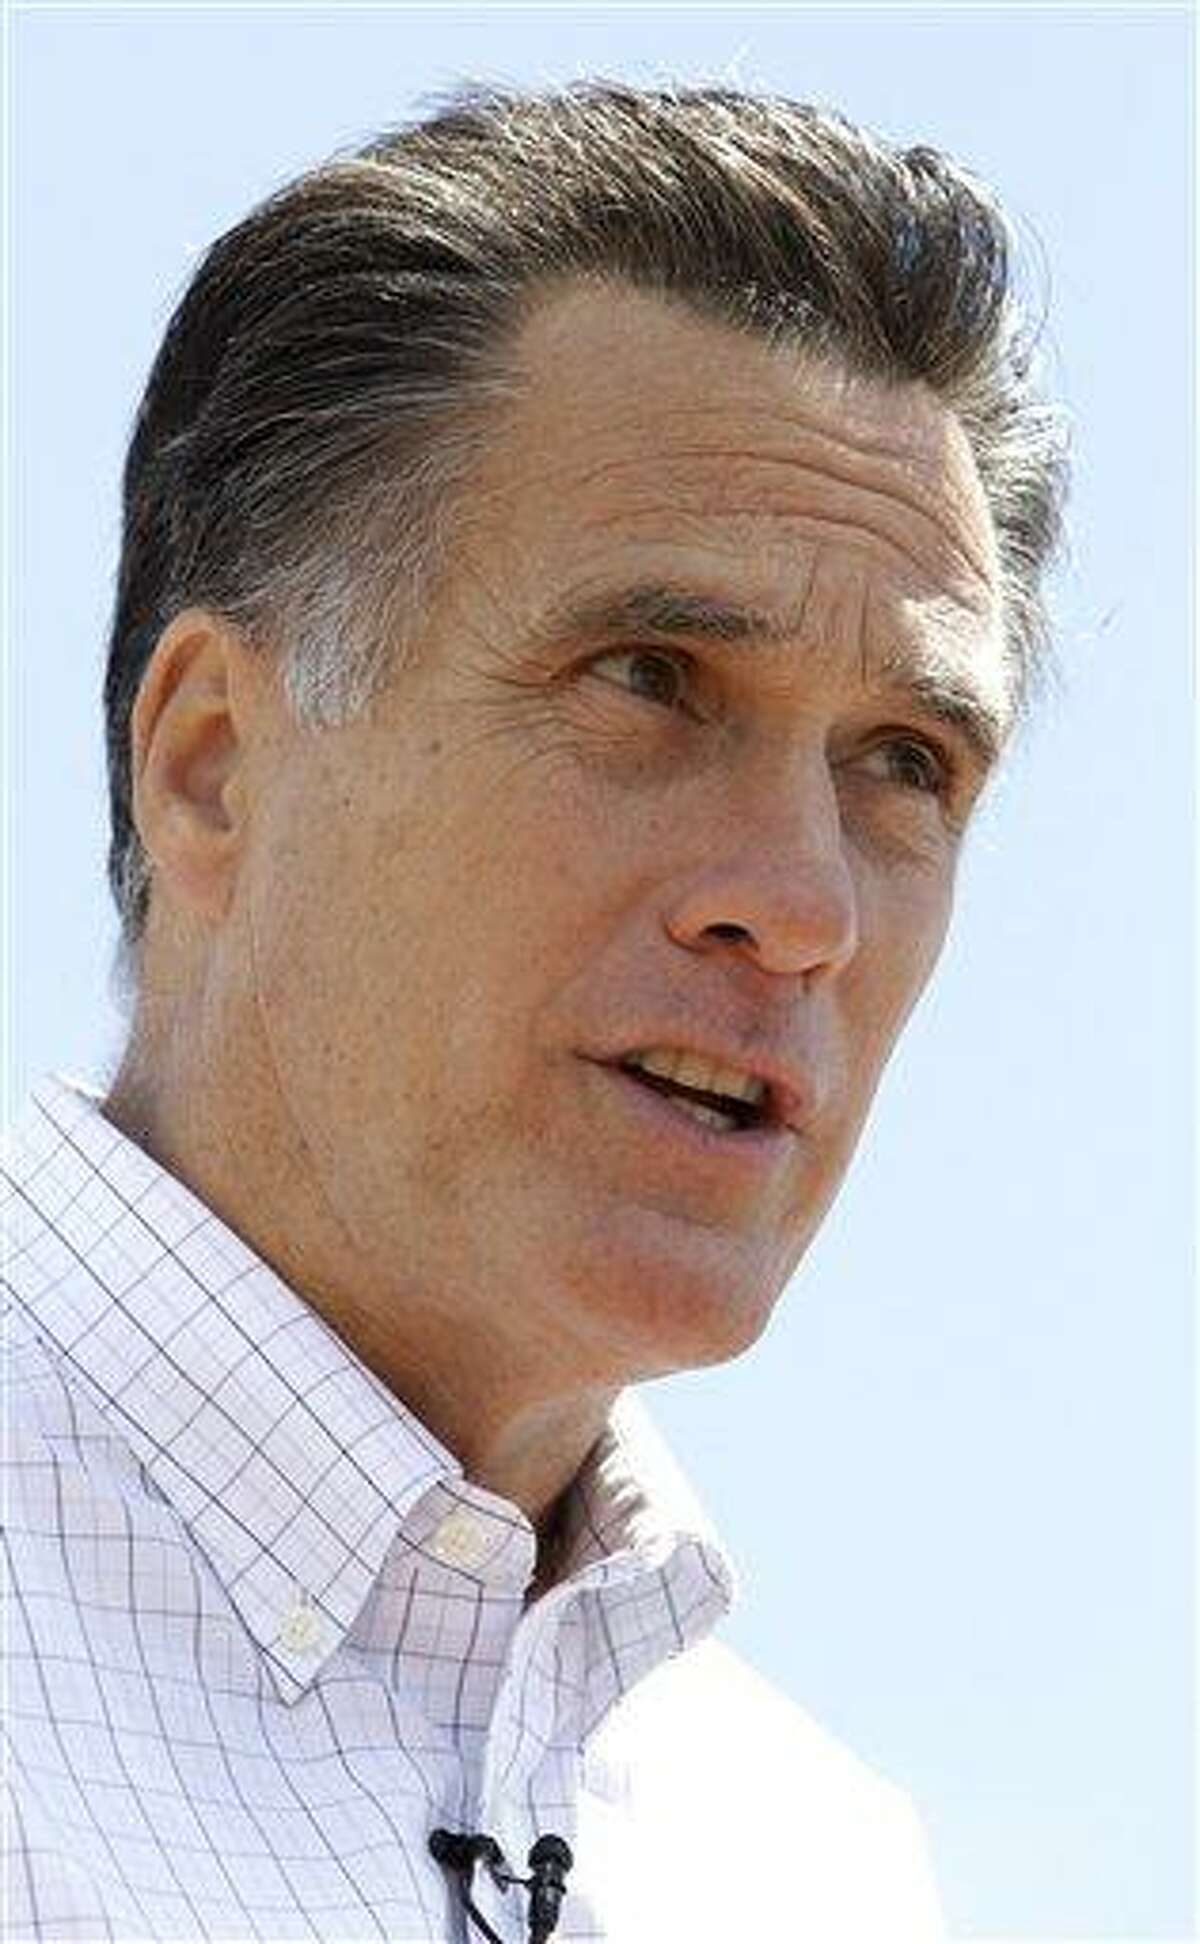 FILE In this June 2, 2011 photo, former Massachusetts Gov. Mitt Romney announces he is running for President of the United States,during a campaign event at Bittersweet Farm in Stratham, N.H. A gathering of religious conservatives drew nearly all the GOP presidential hopefuls to a single stage, a claim that a South Carolina debate and a well-publicized forum in New Hampshire couldn't make about their recent events. The Faith and Freedom Coalition's two-day conference proved that the religious right still plays a major role in the nominating process, even if it's less organized than during the Christian Coalition's heyday and economic issues are dominating the early campaign. (AP Photo/Stephan Savoia)